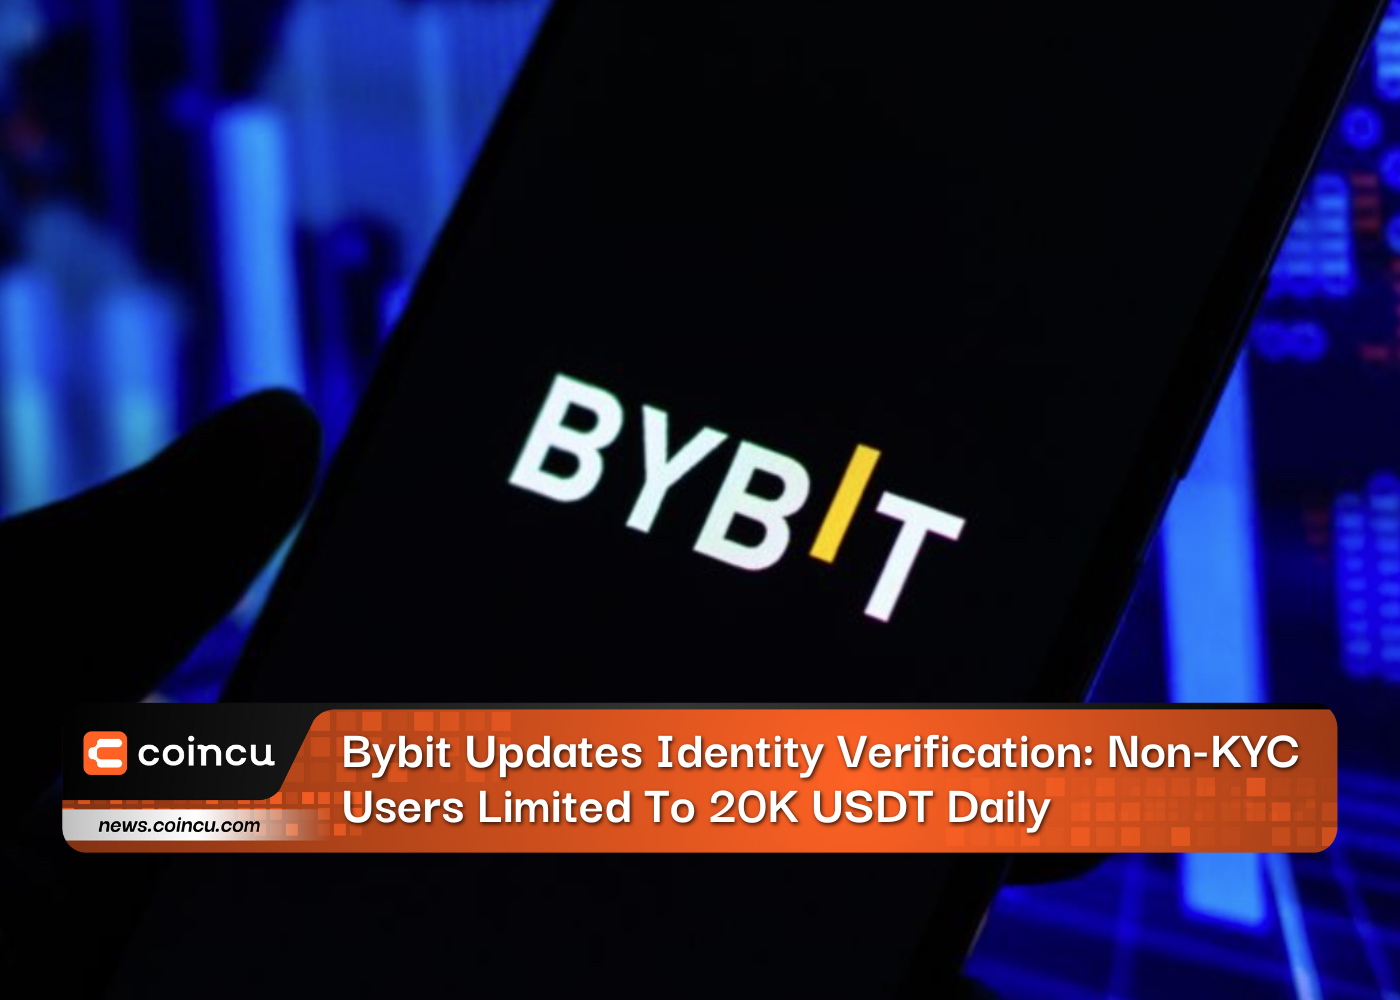 Bybit Updates Identity Verification: Non-KYC Users Limited To 20K USDT Daily